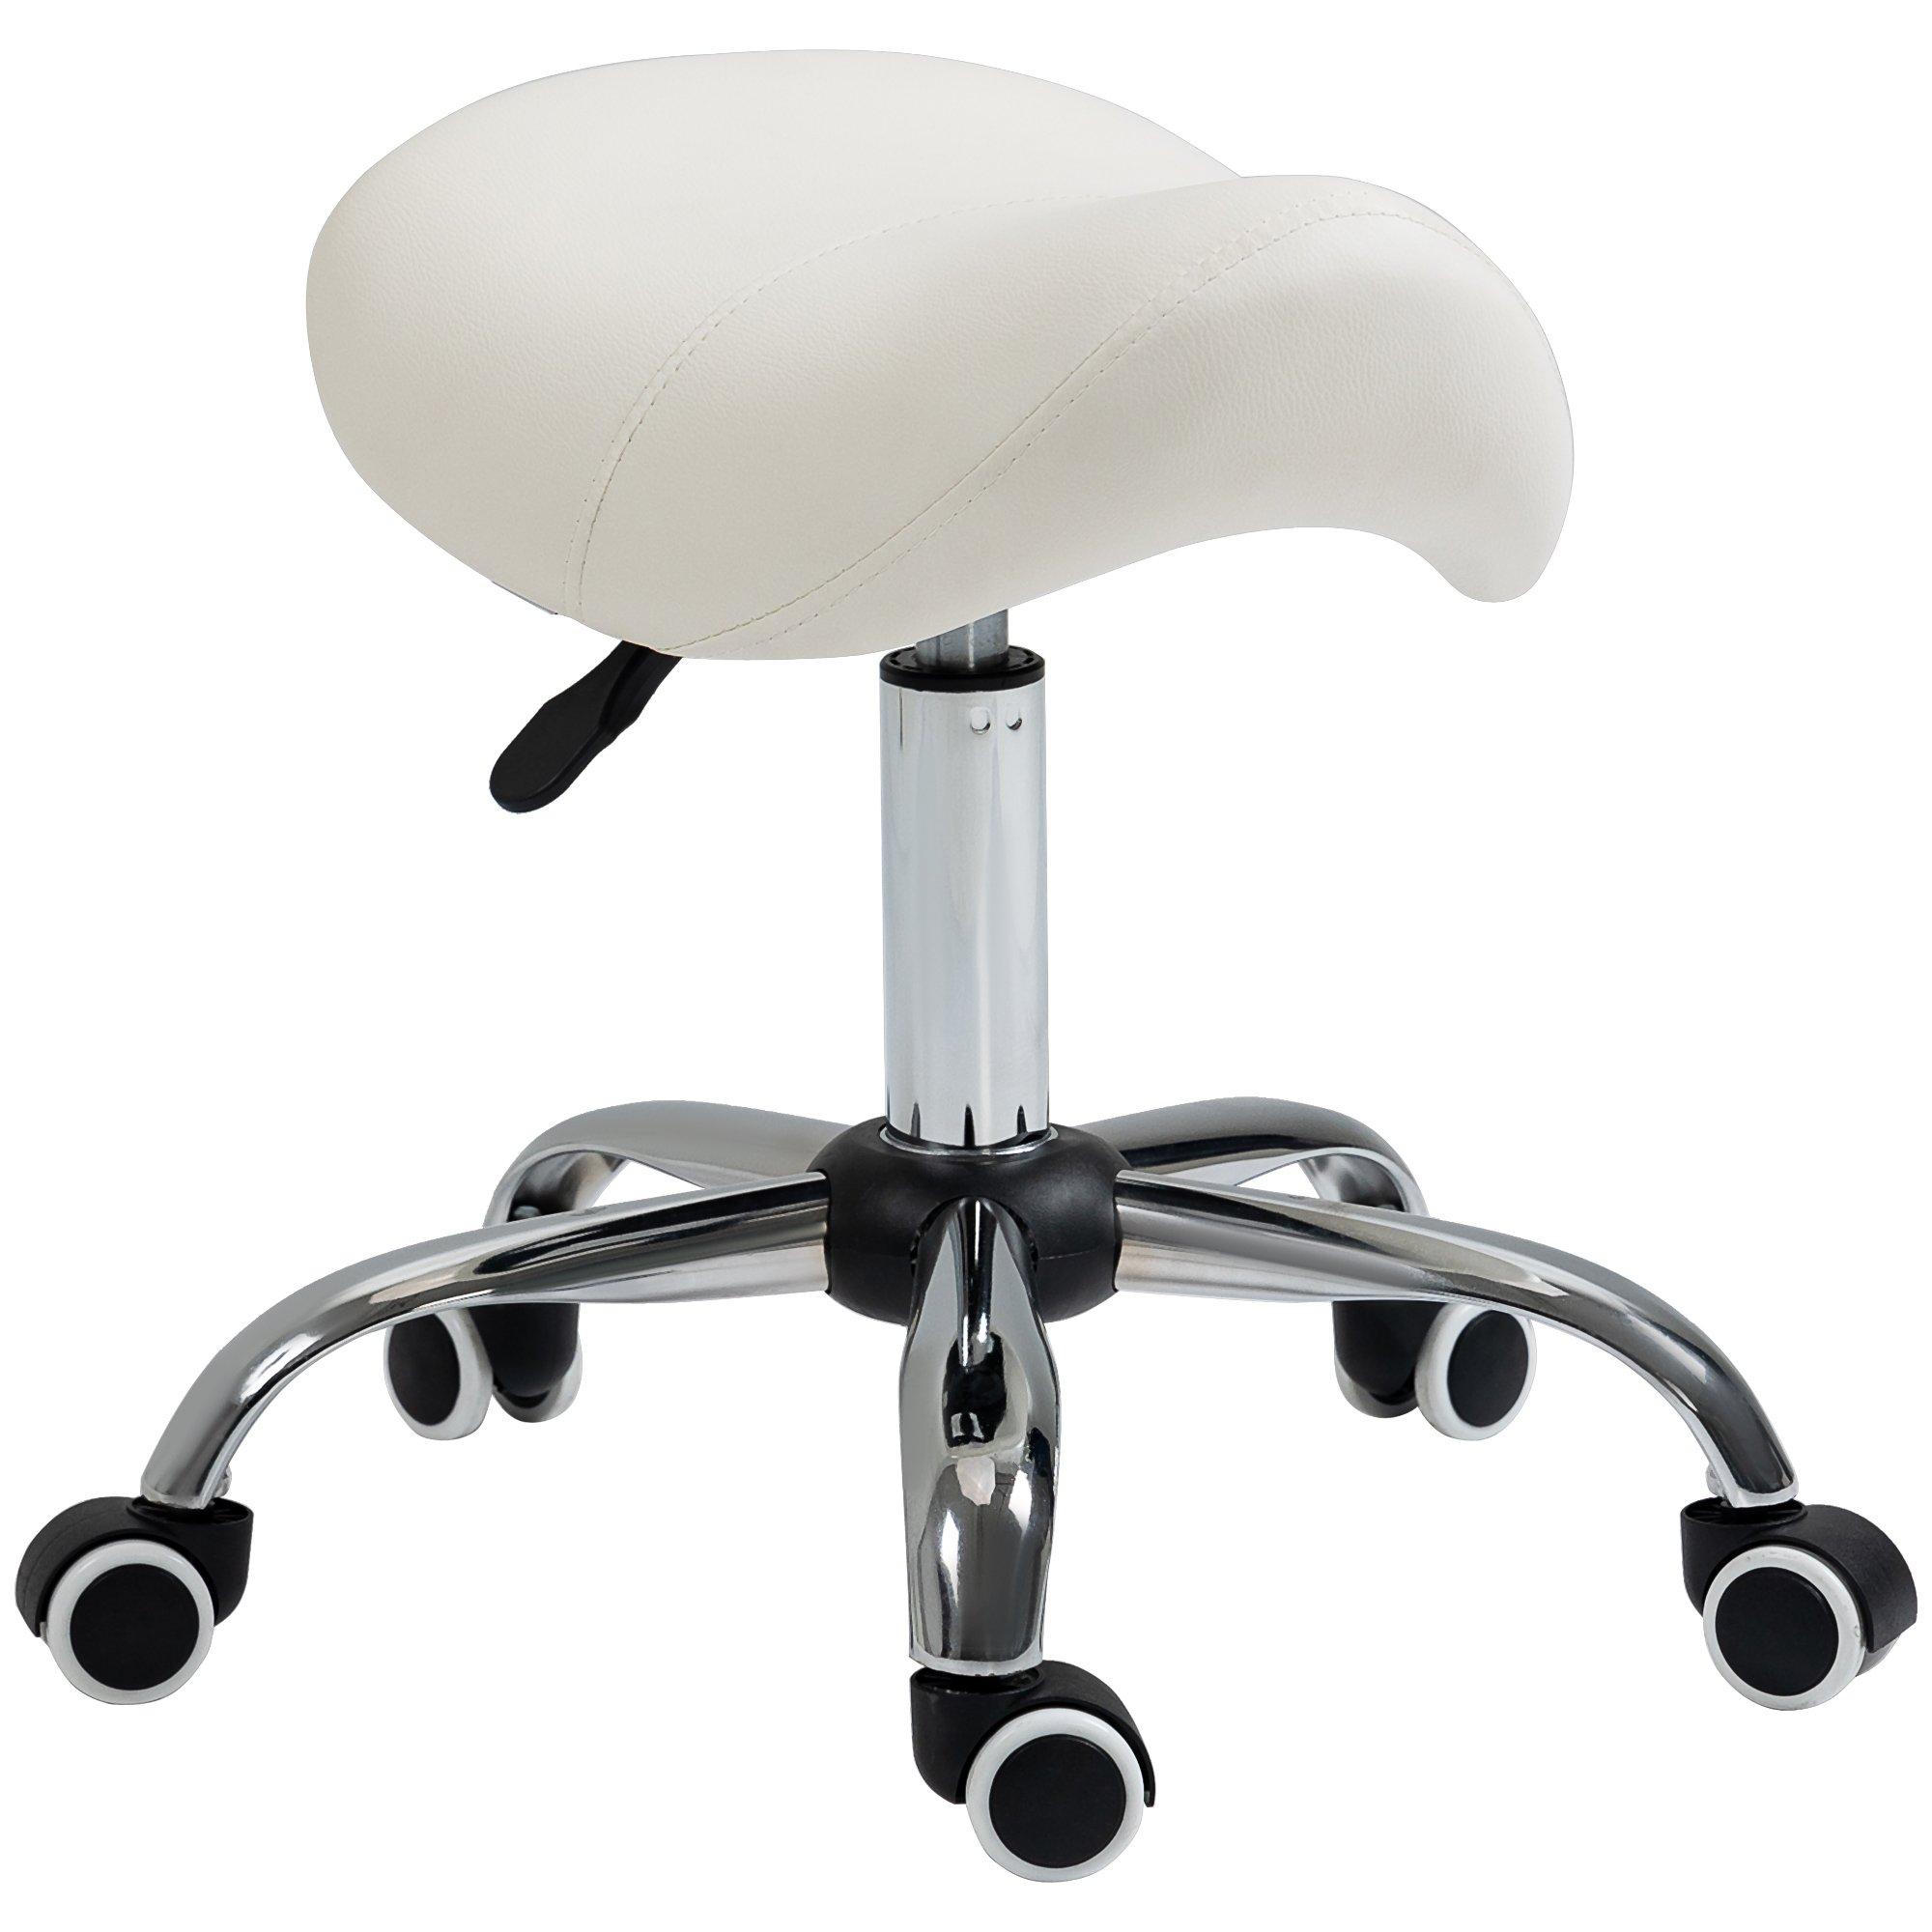 Saddle Stool Hydraulic Rolling Faux Leather Height Adjust Chair